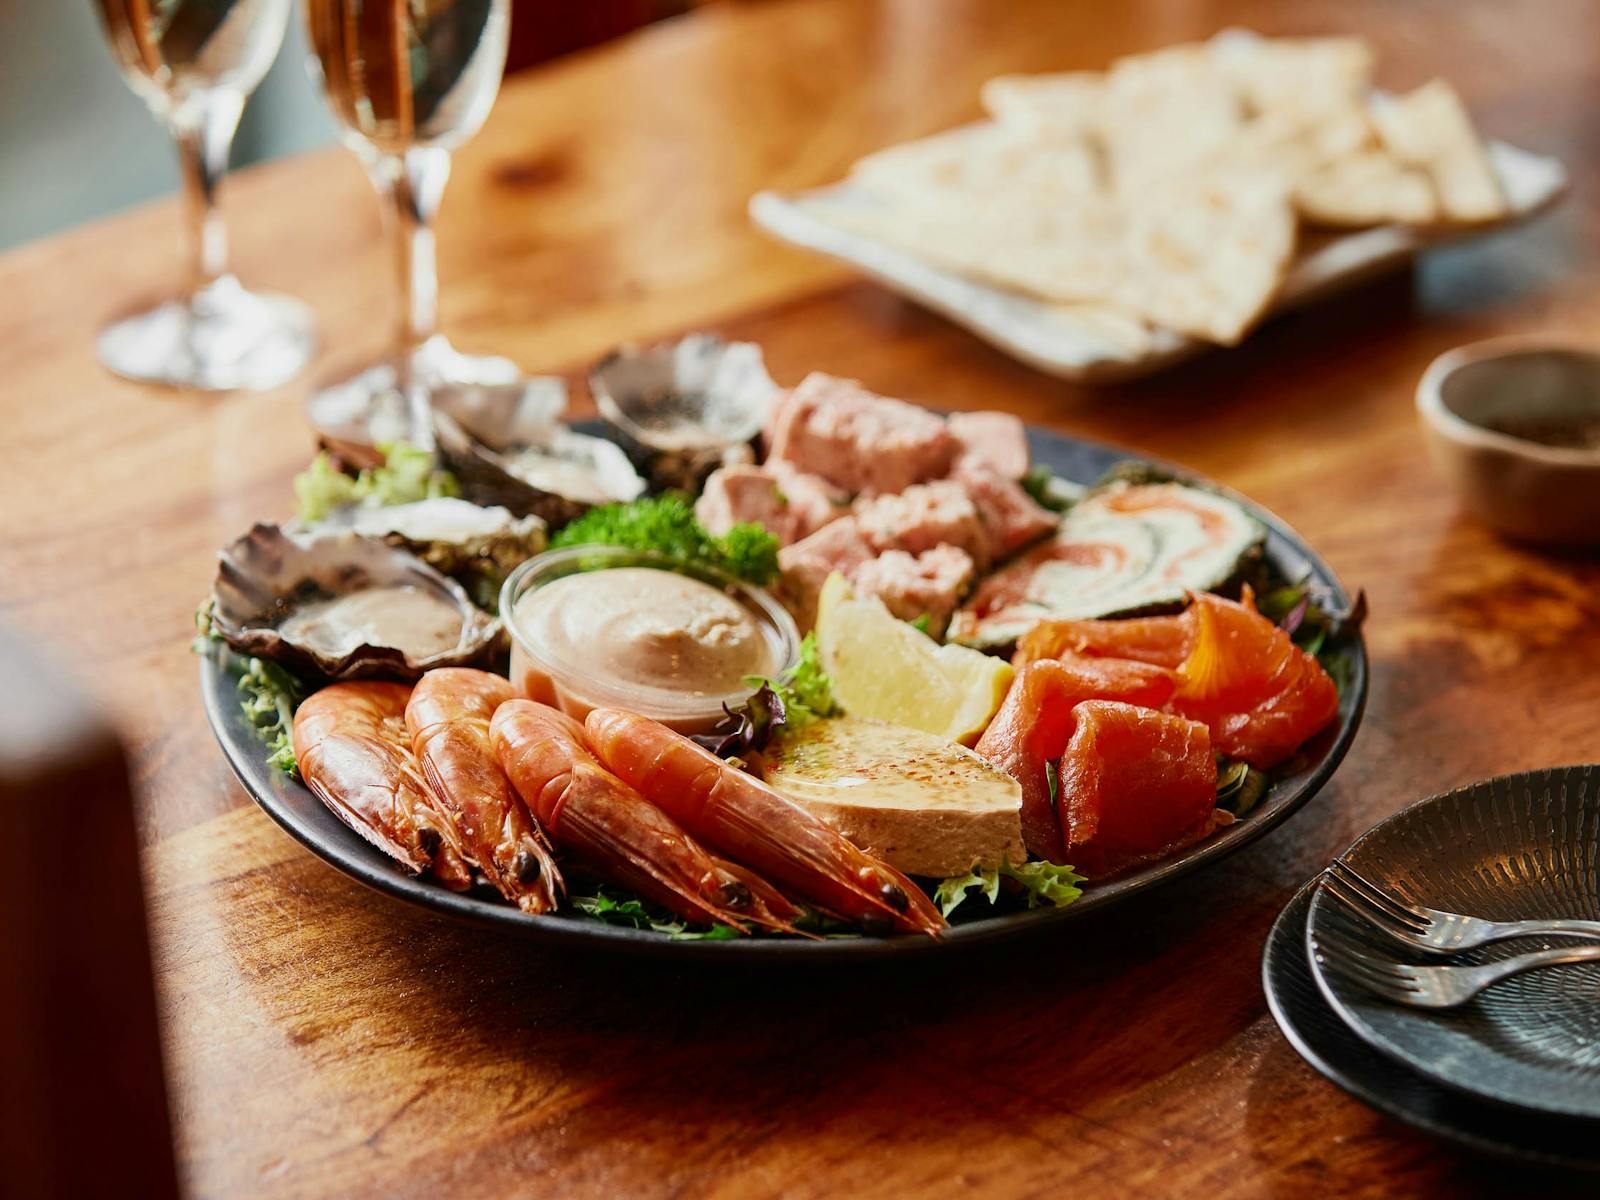 A bowl of mixed gourmet seafood, including smoked salmon, prawns, terrine, roulade, oysters and more